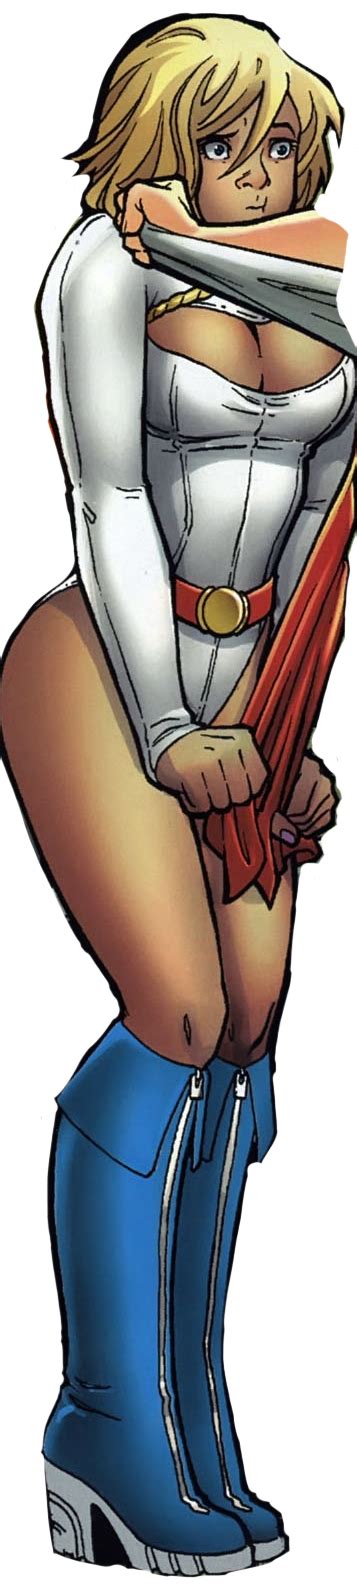 Power Girl Porn Images Superheroes Pictures Pictures